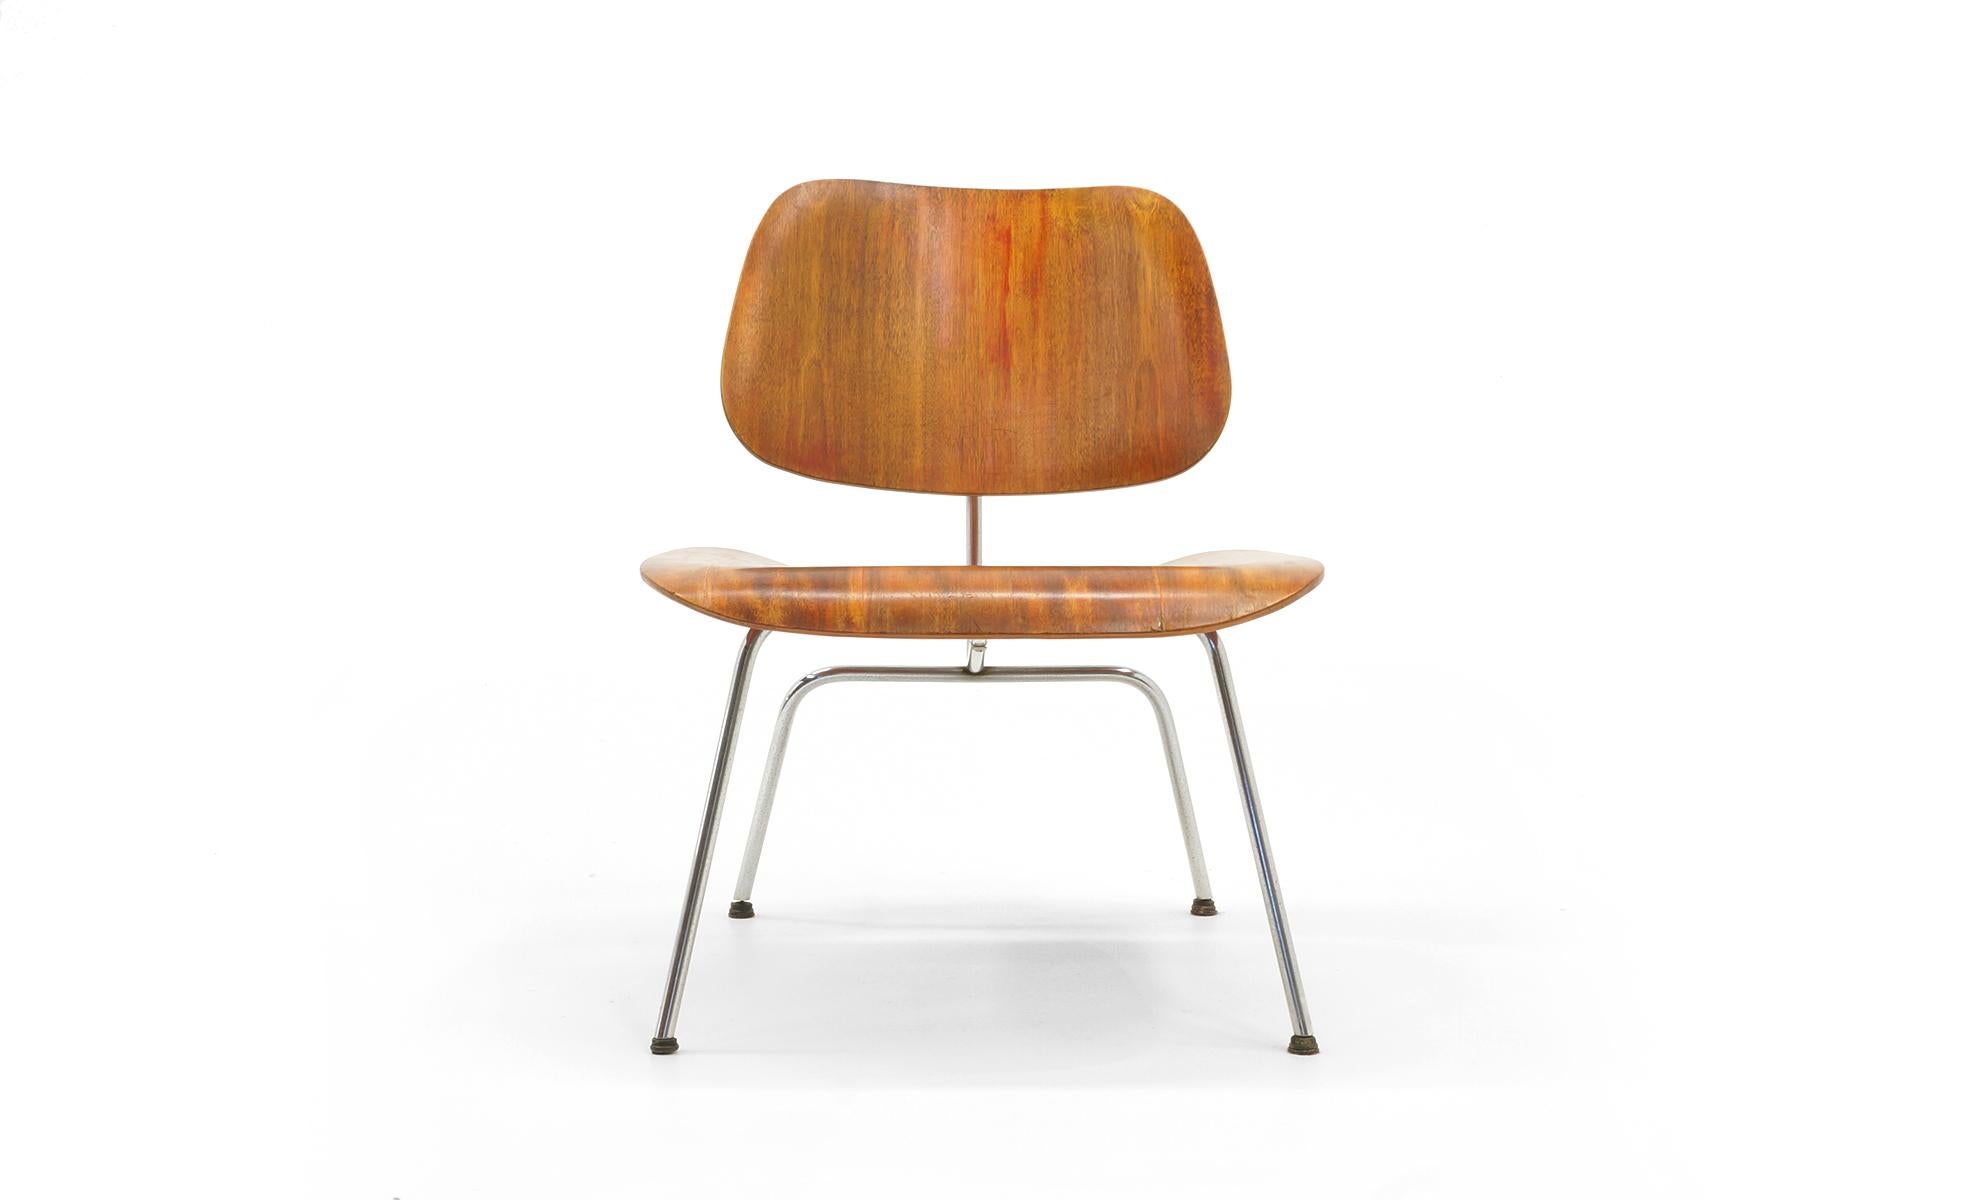 Very early Charles Eames and Ray Eames LCM, for Evans Products Company, Venice, CA, circa 1945. Red aniline-dyed molded plywood, polished chrome, original glides. Early frame construction. Signed with Evans label.
  